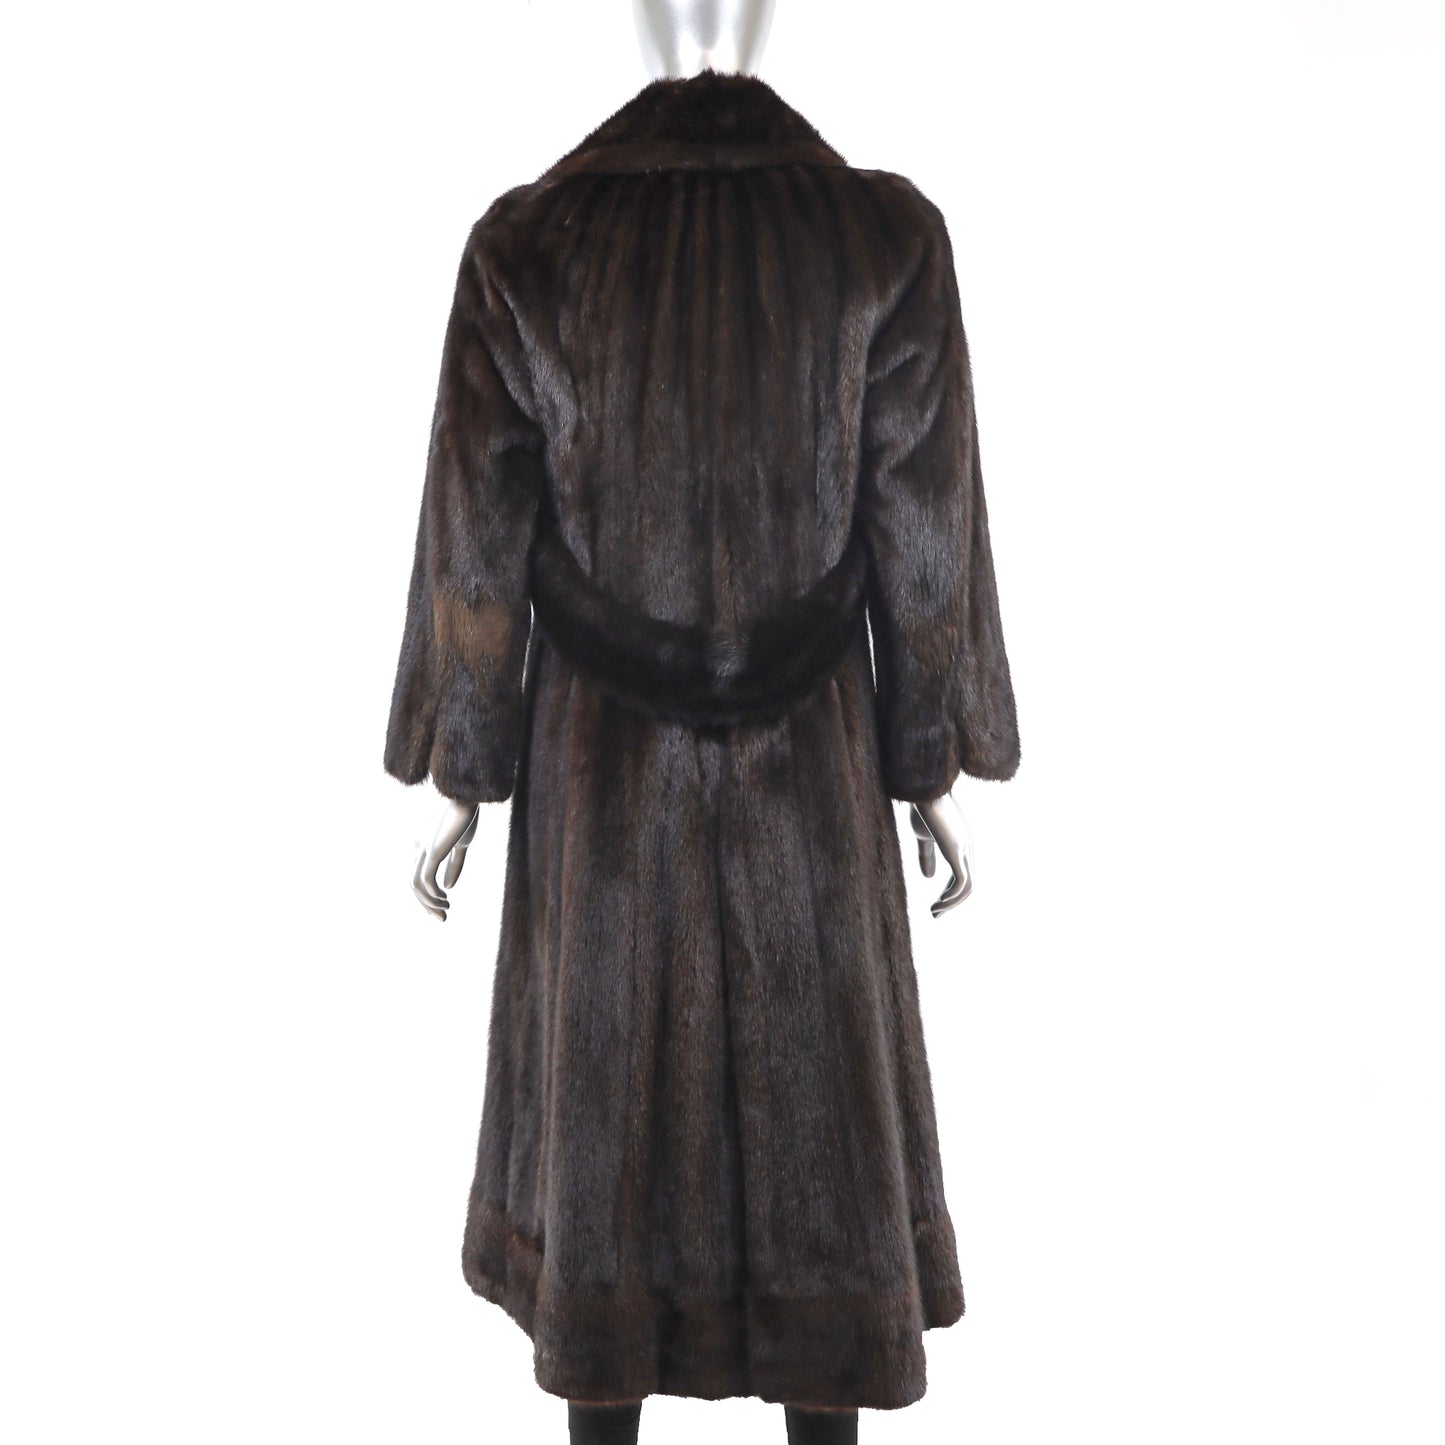 Mahogany Mink Coat with Separate Hood- Size S-M